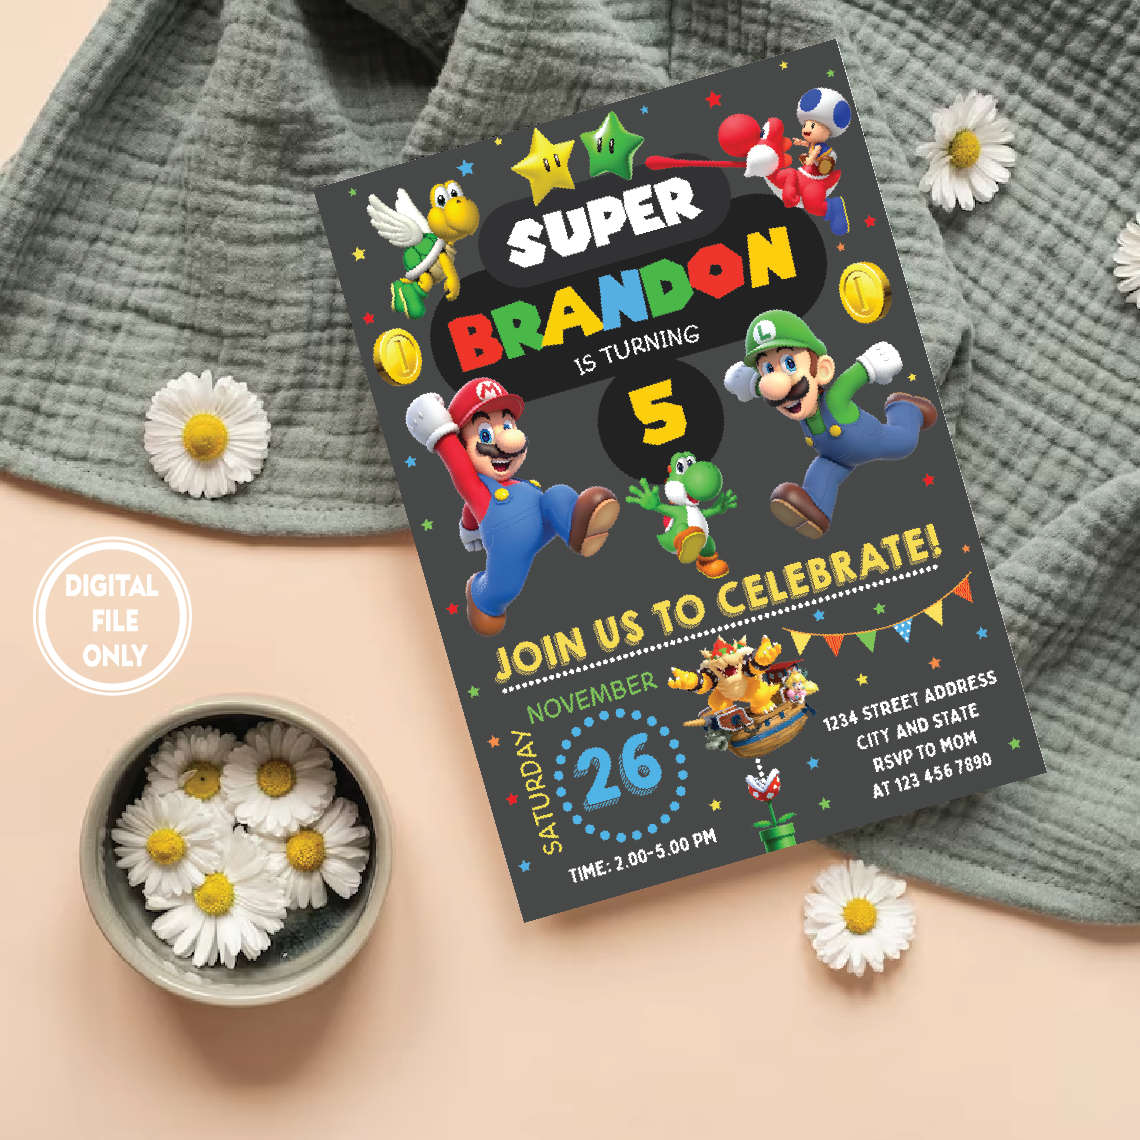 Personalized File Editable Birthday Invitation Digital, Super Brothers Evite, Printable Download, Chalkboard Kid Invite PNG File Only